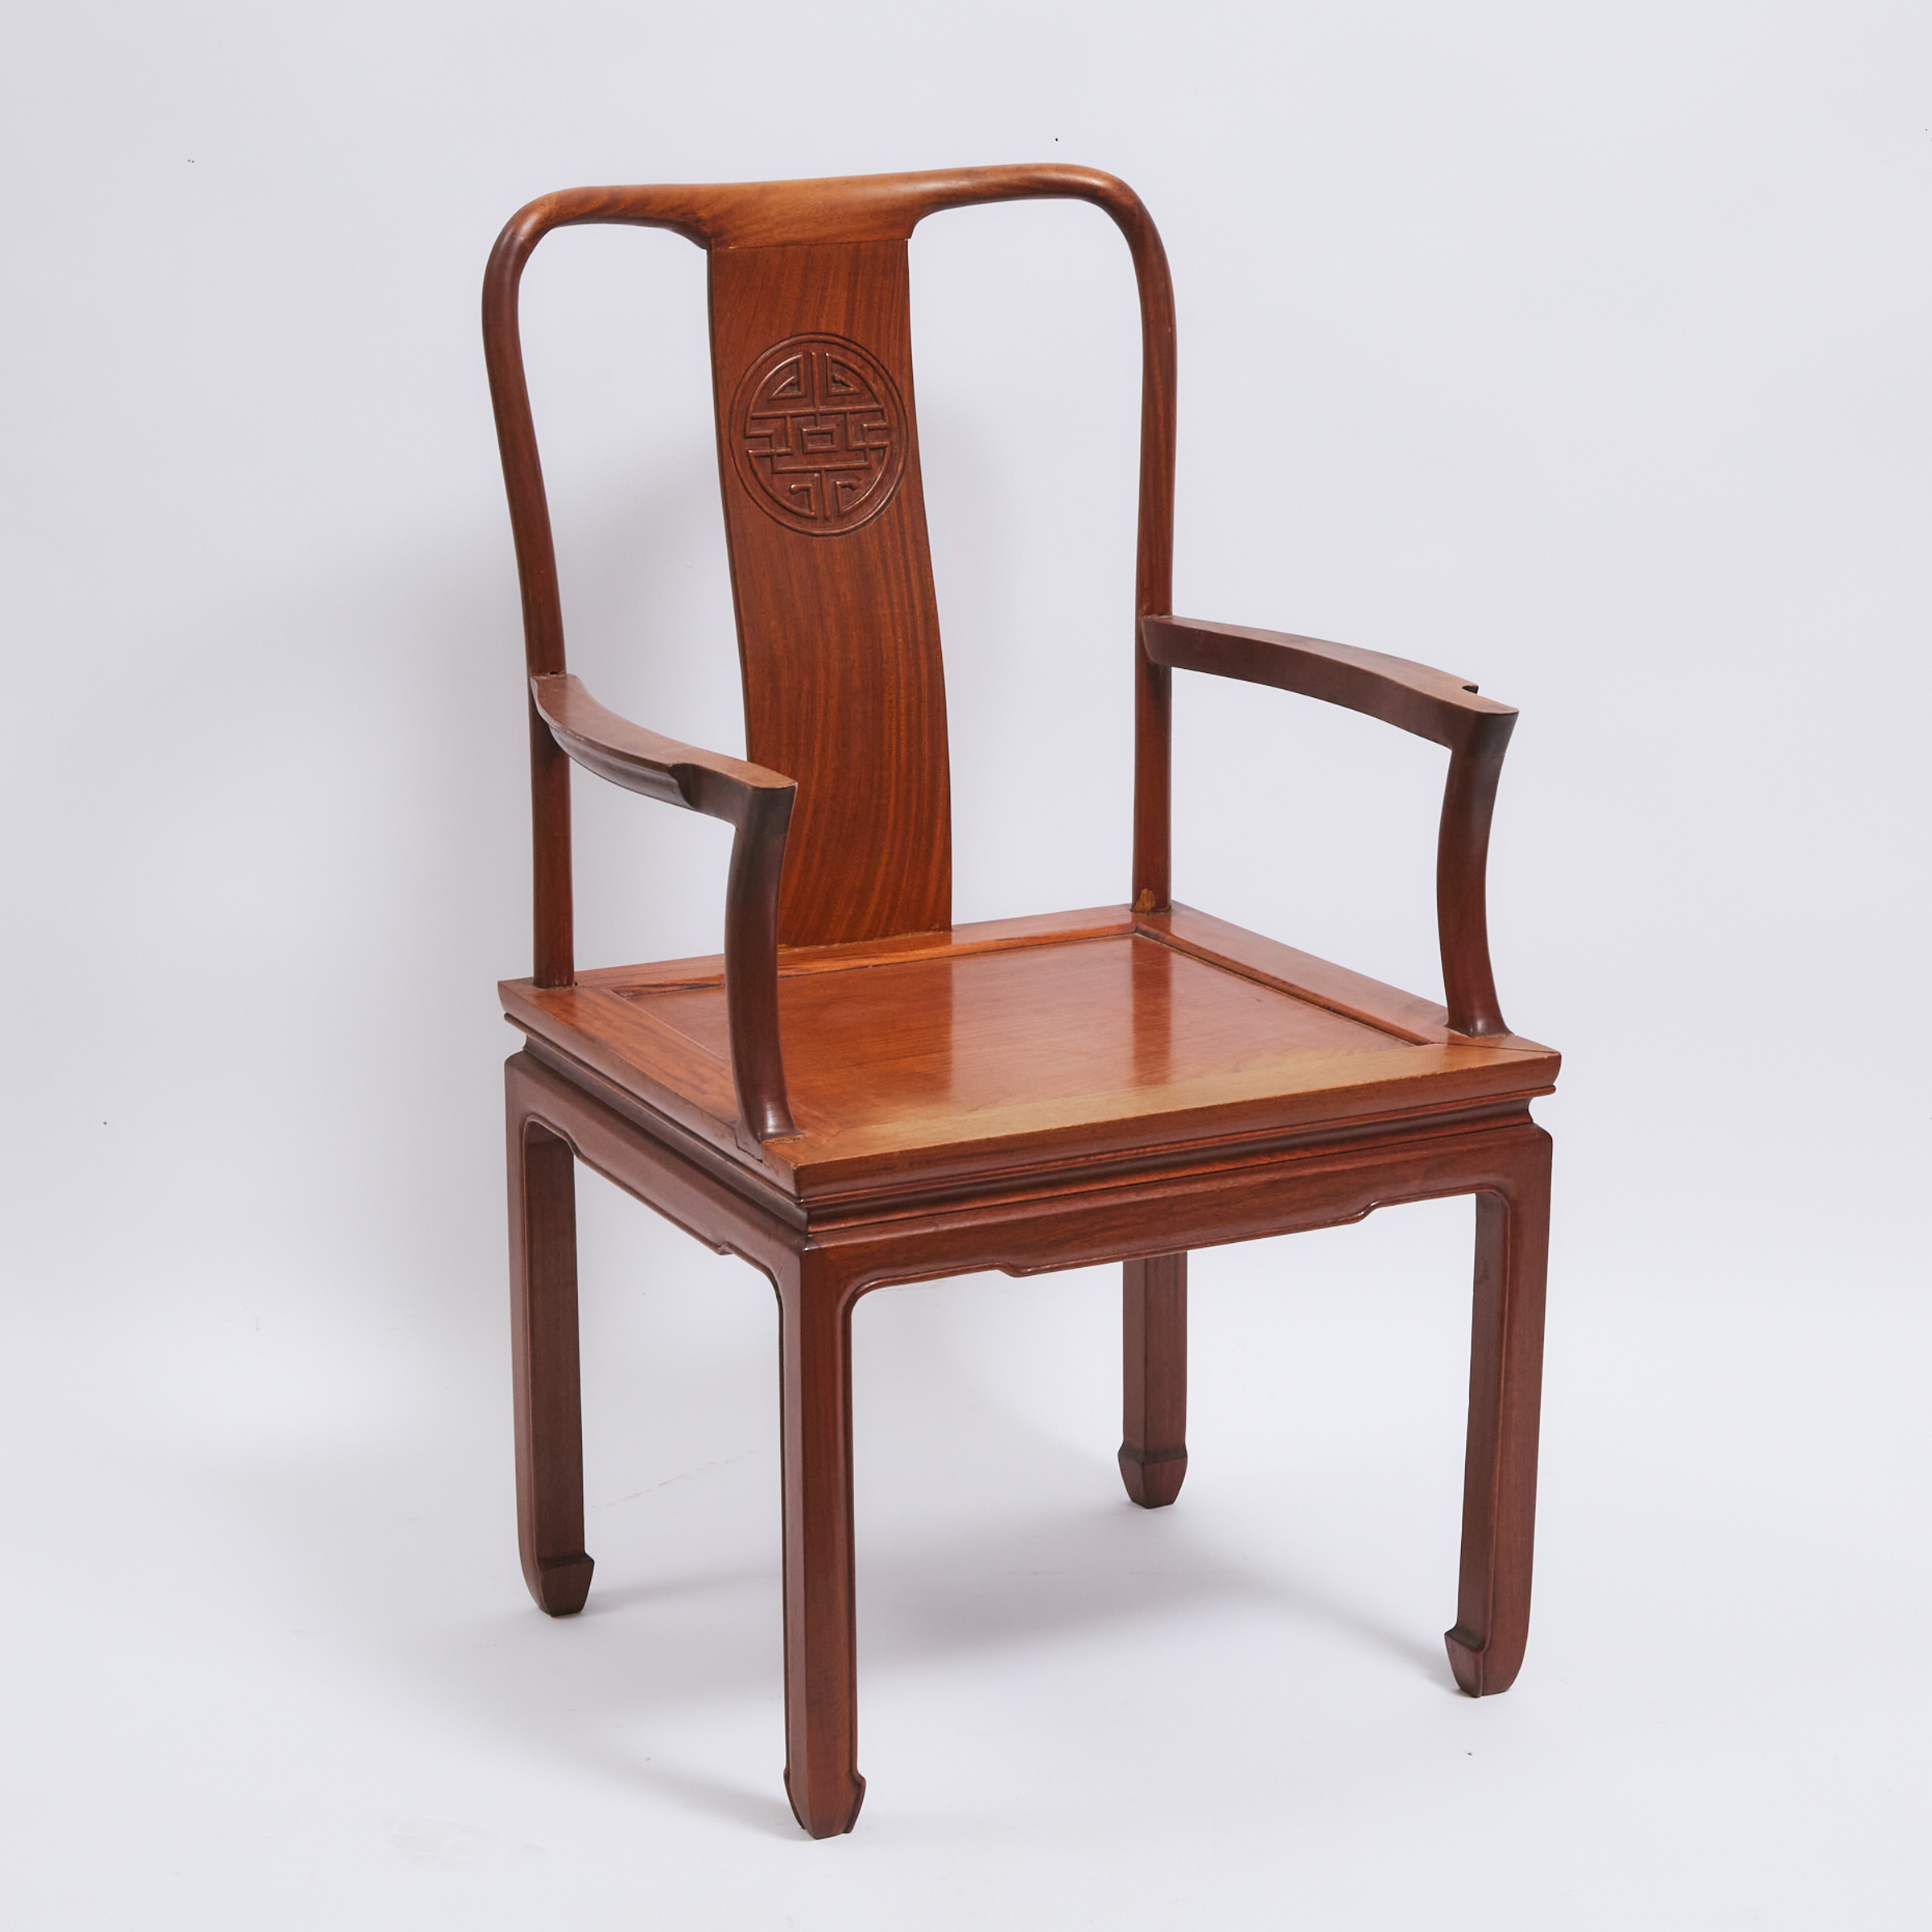 A Chinese Ming Style Hardwood Chair  3ab93c